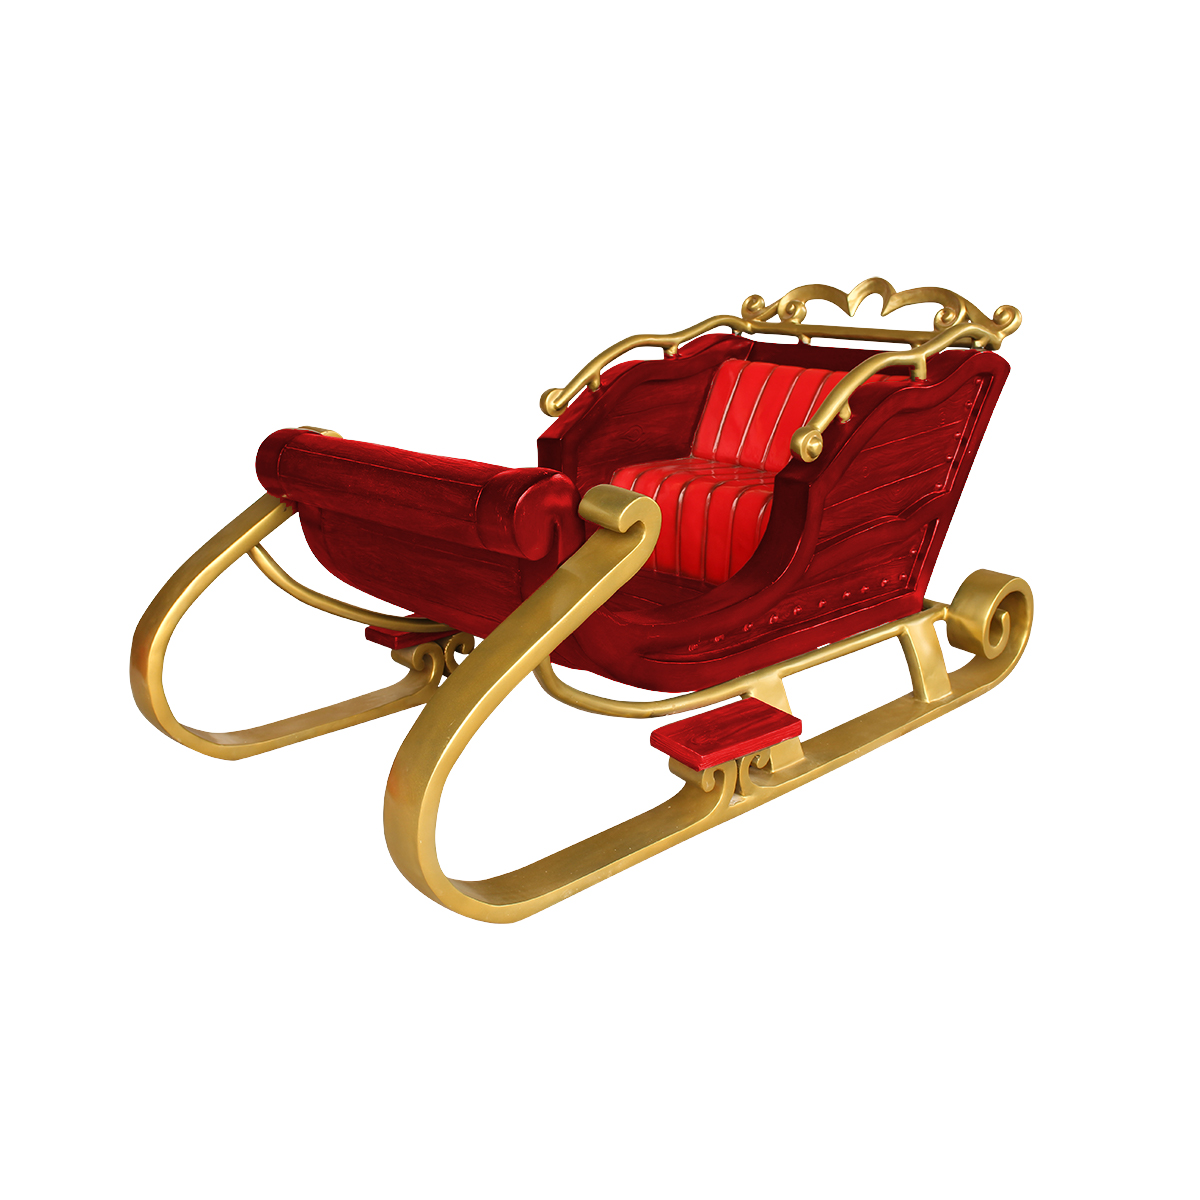 Santa Sleigh - Christmas Display - Red/Gold - 6.6ft Long - 3.3ft Tall - 3.9ft Wide